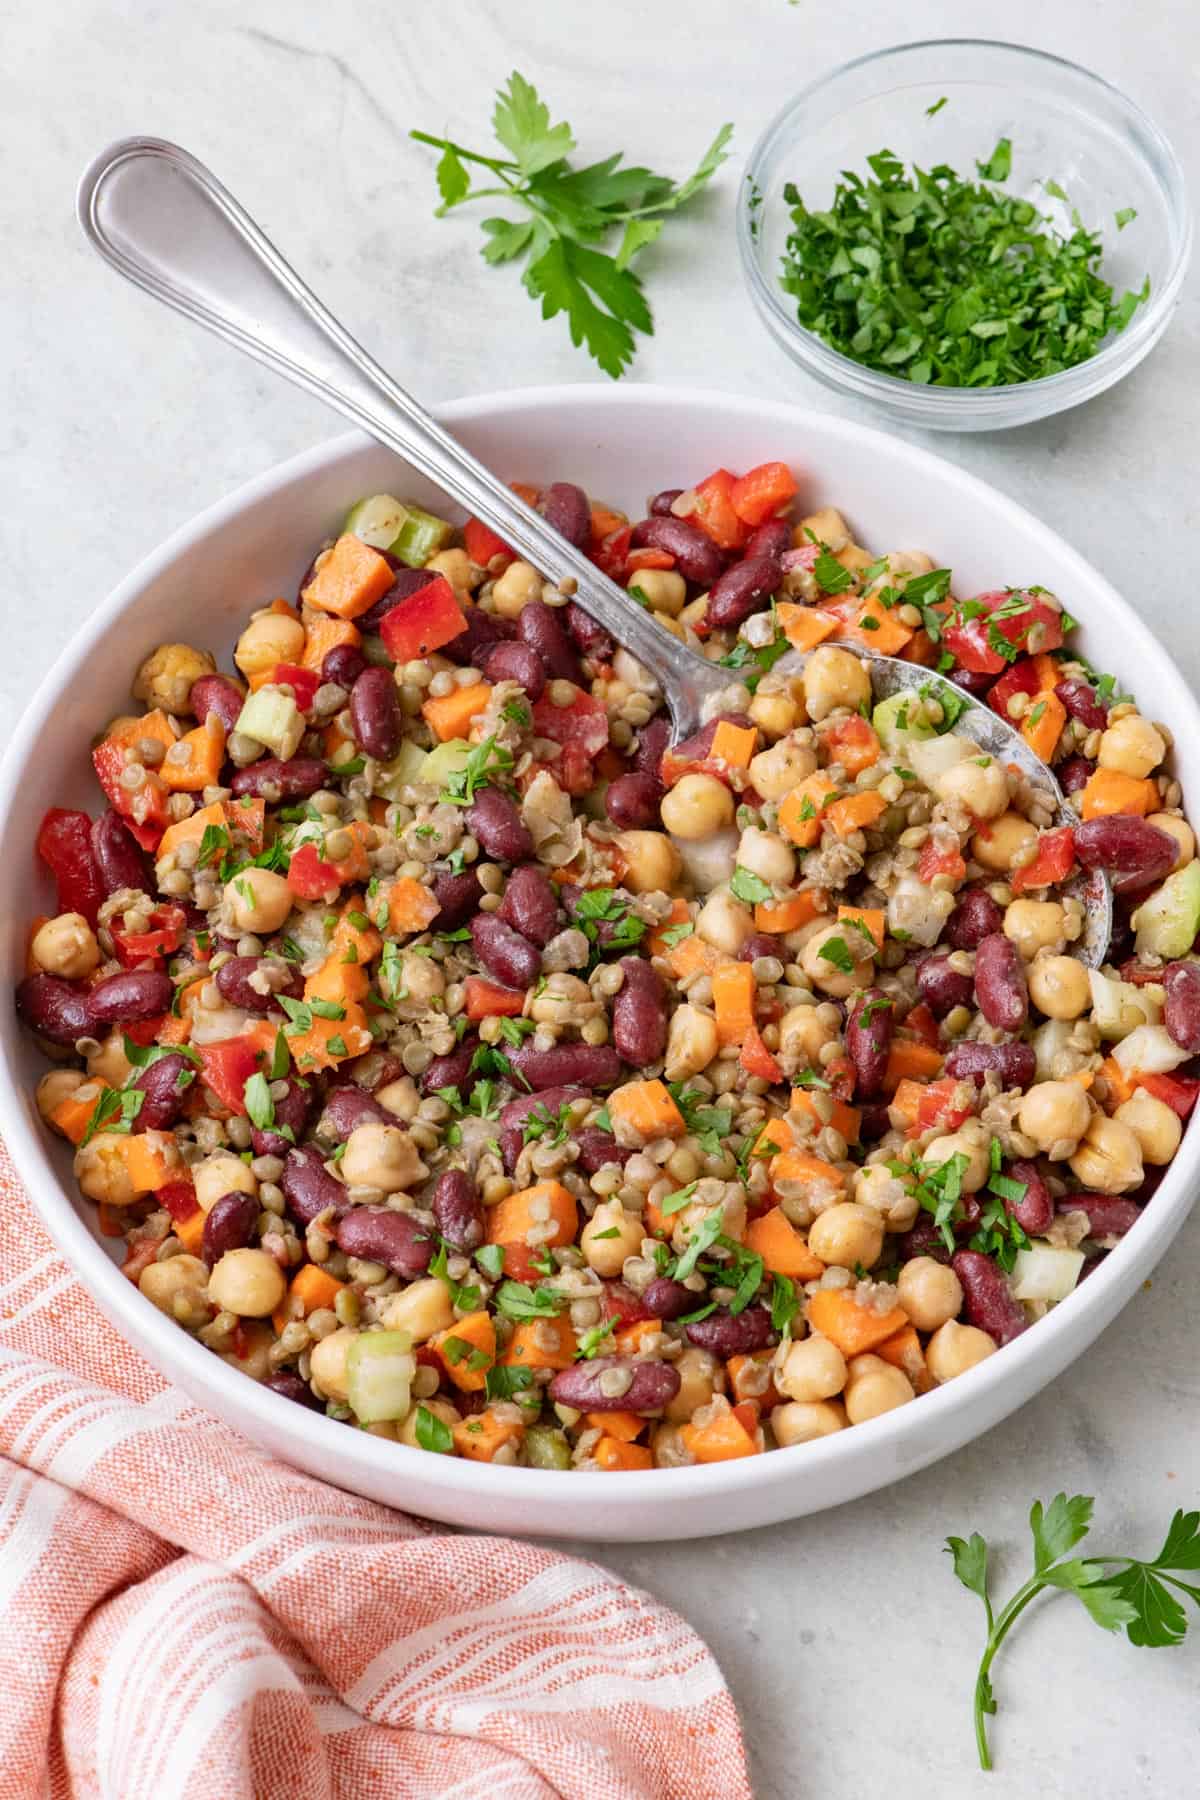 A spoon dipped in to a serving bowl of a hearty protein salad with lentils, beans, chickpeas, and chopped vegetables.